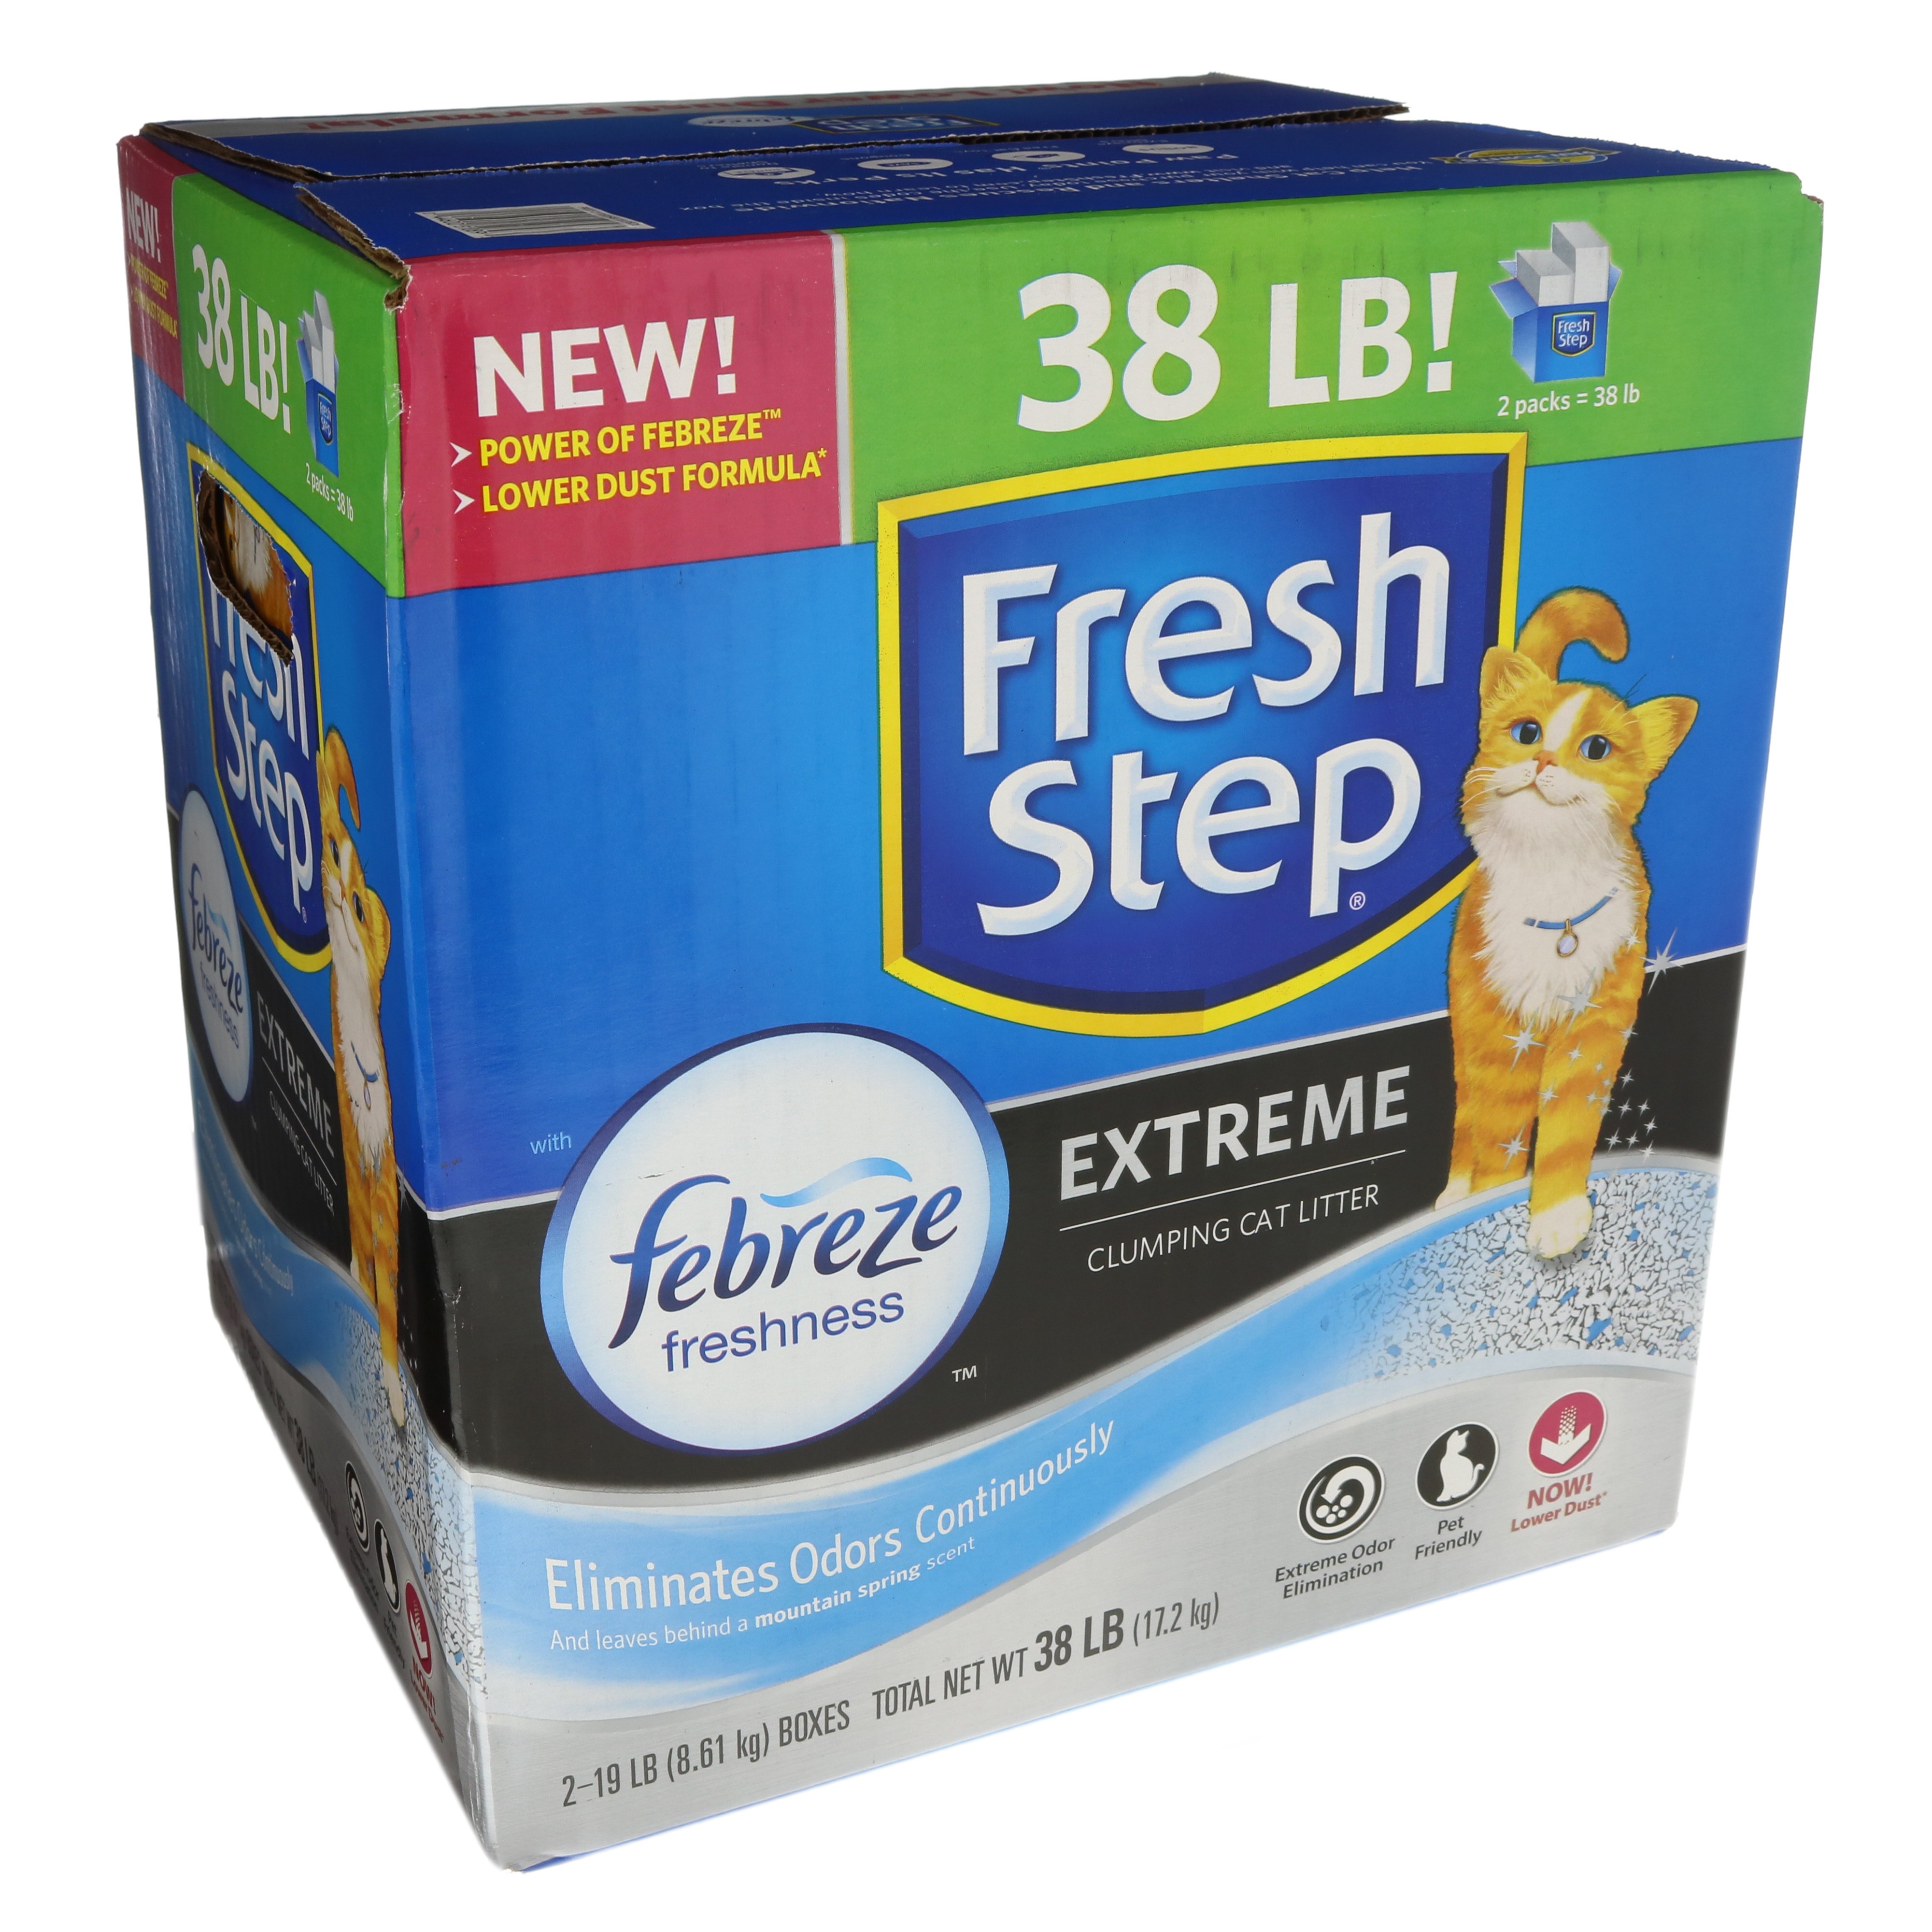 Fresh Step Extreme With Febreze Clumping Cat Litter Shop Cats at HEB